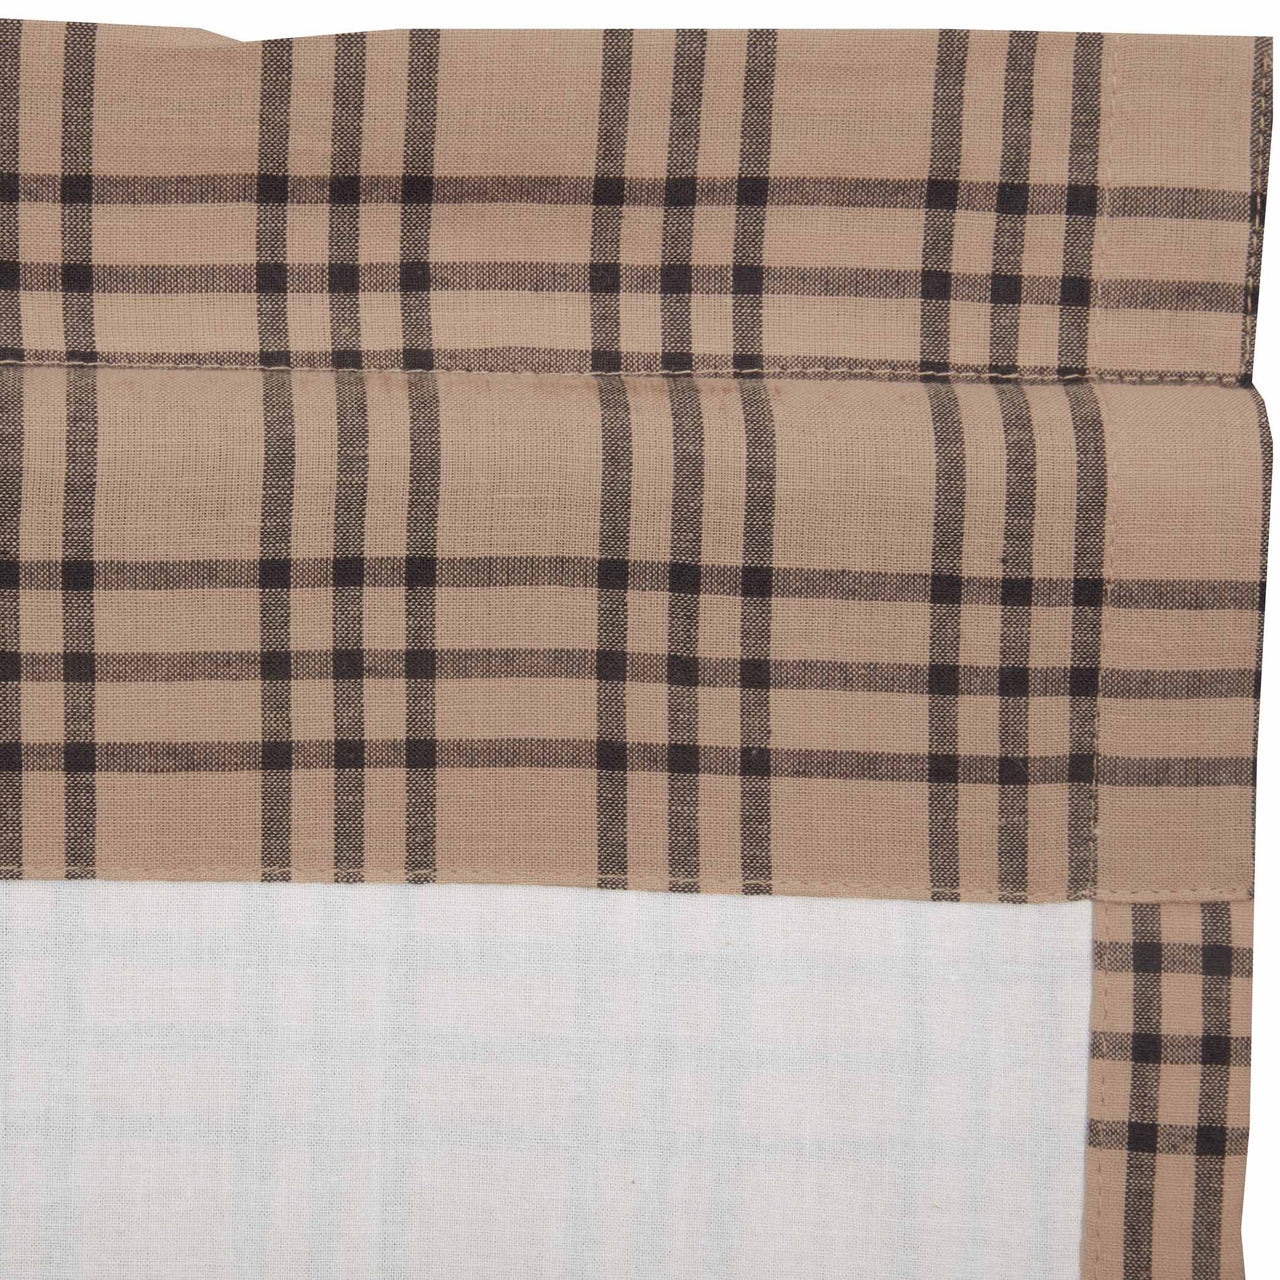 Sawyer Mill Charcoal Plaid Panel Curtain 96"x40" VHC Brands